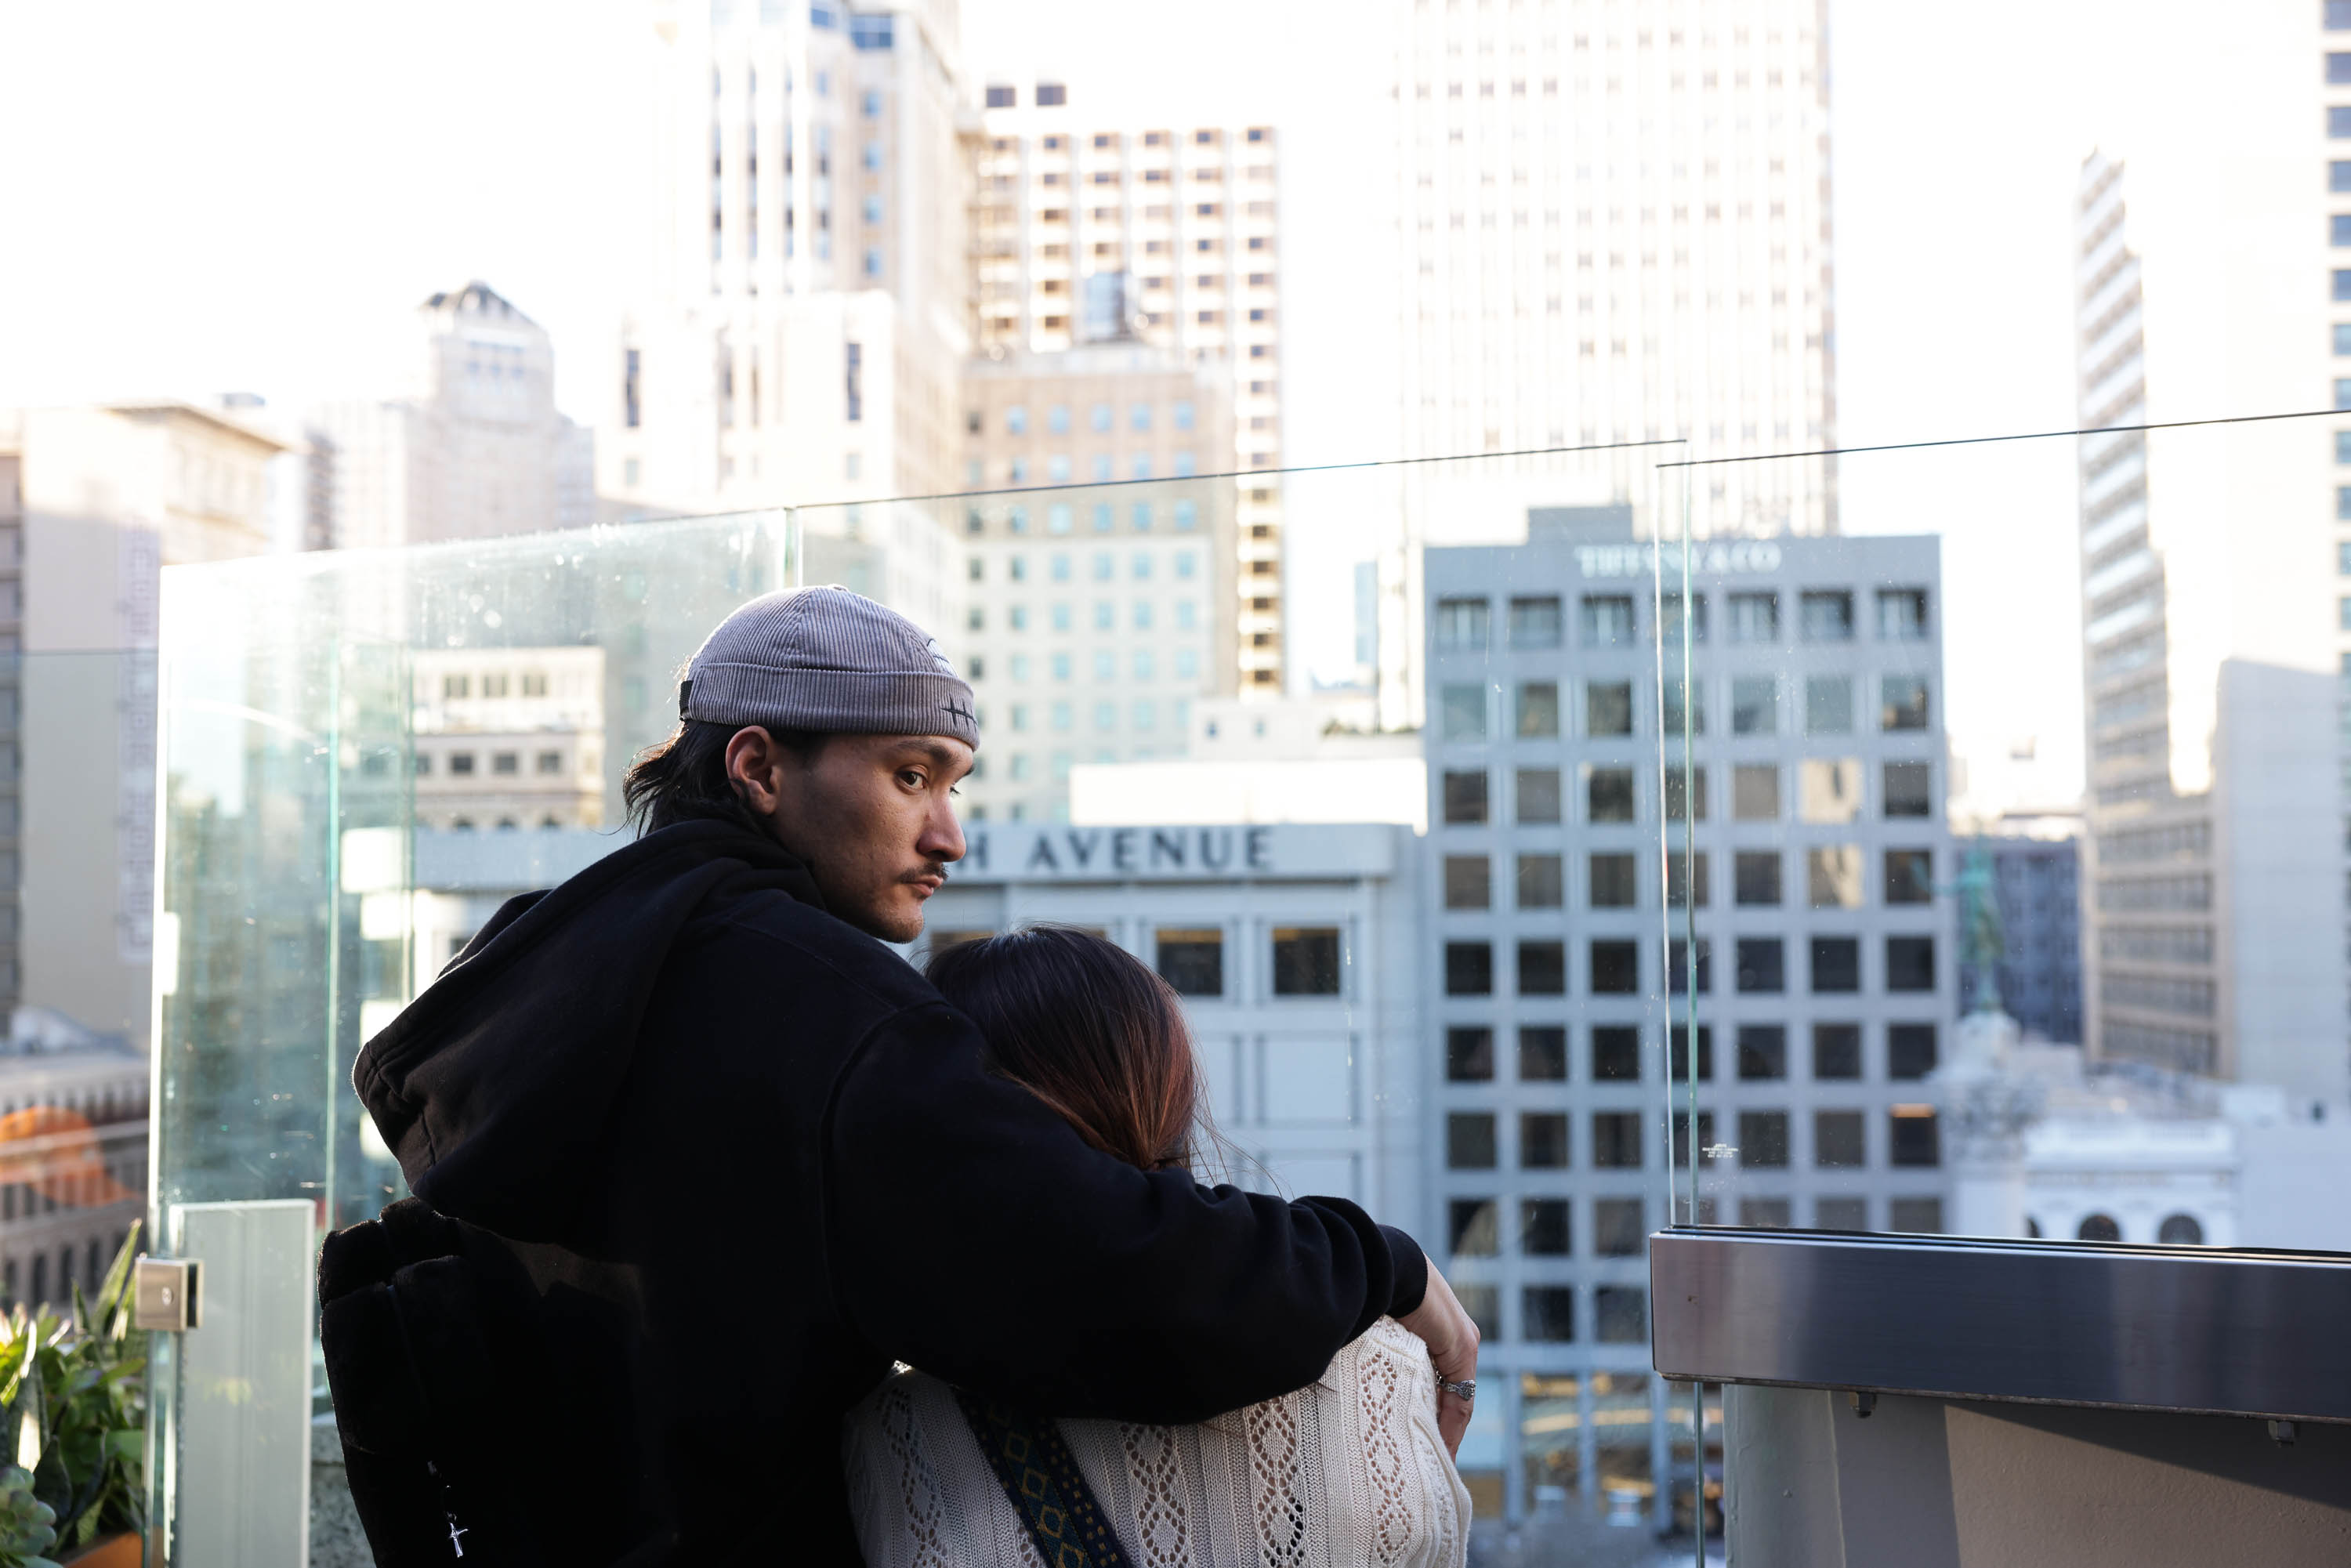 A man and woman are embracing on a balcony overlooking a cityscape.